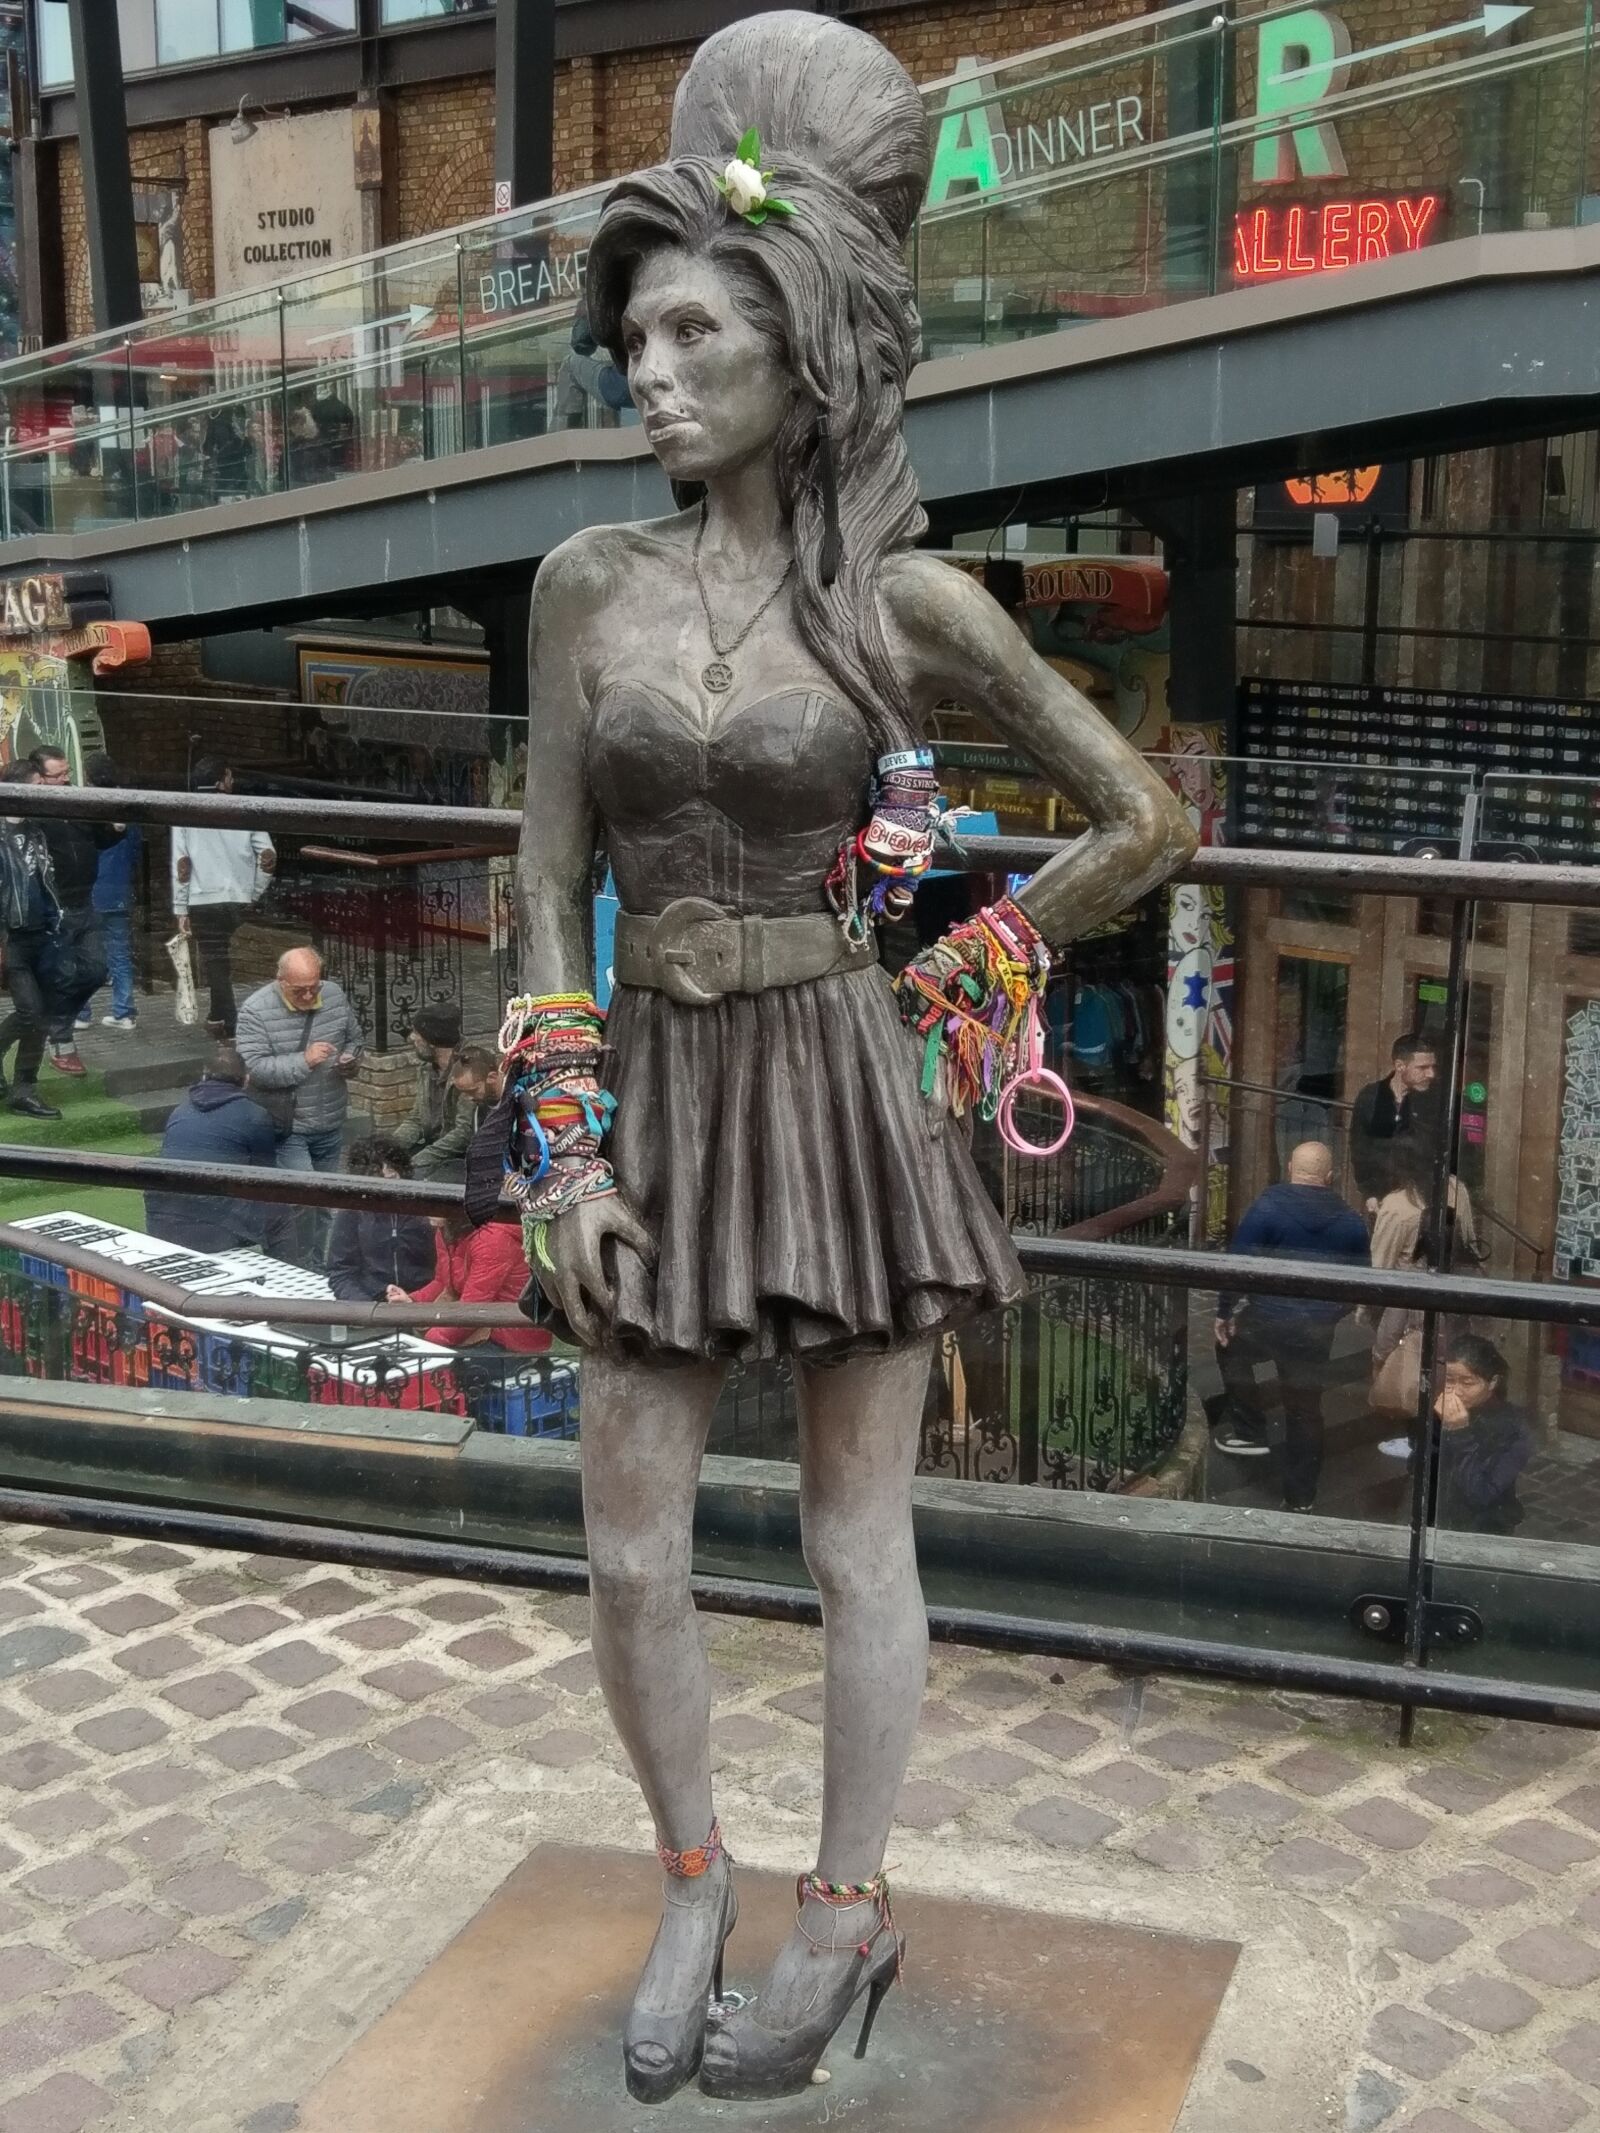 HTC 10 sample photo. Amy winehouse, the statue photography